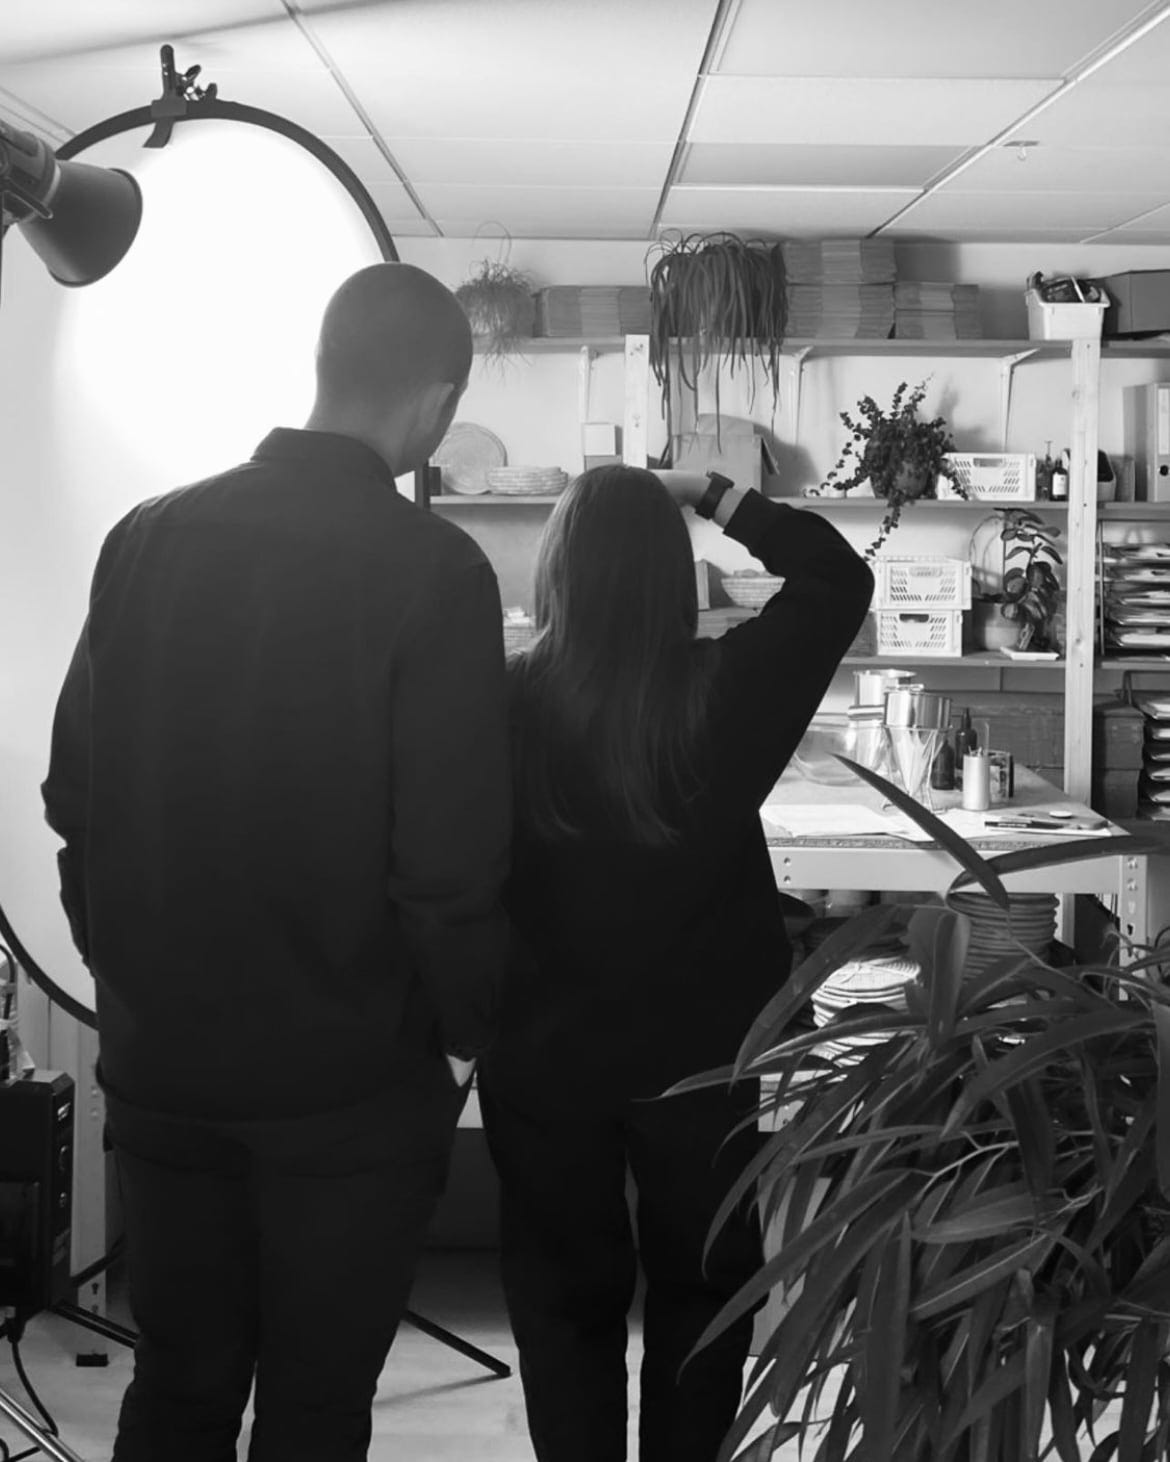 A man and a woman have their back to the camera. They are taking pictures in a workshop with a big light to their left and shelving on the right.